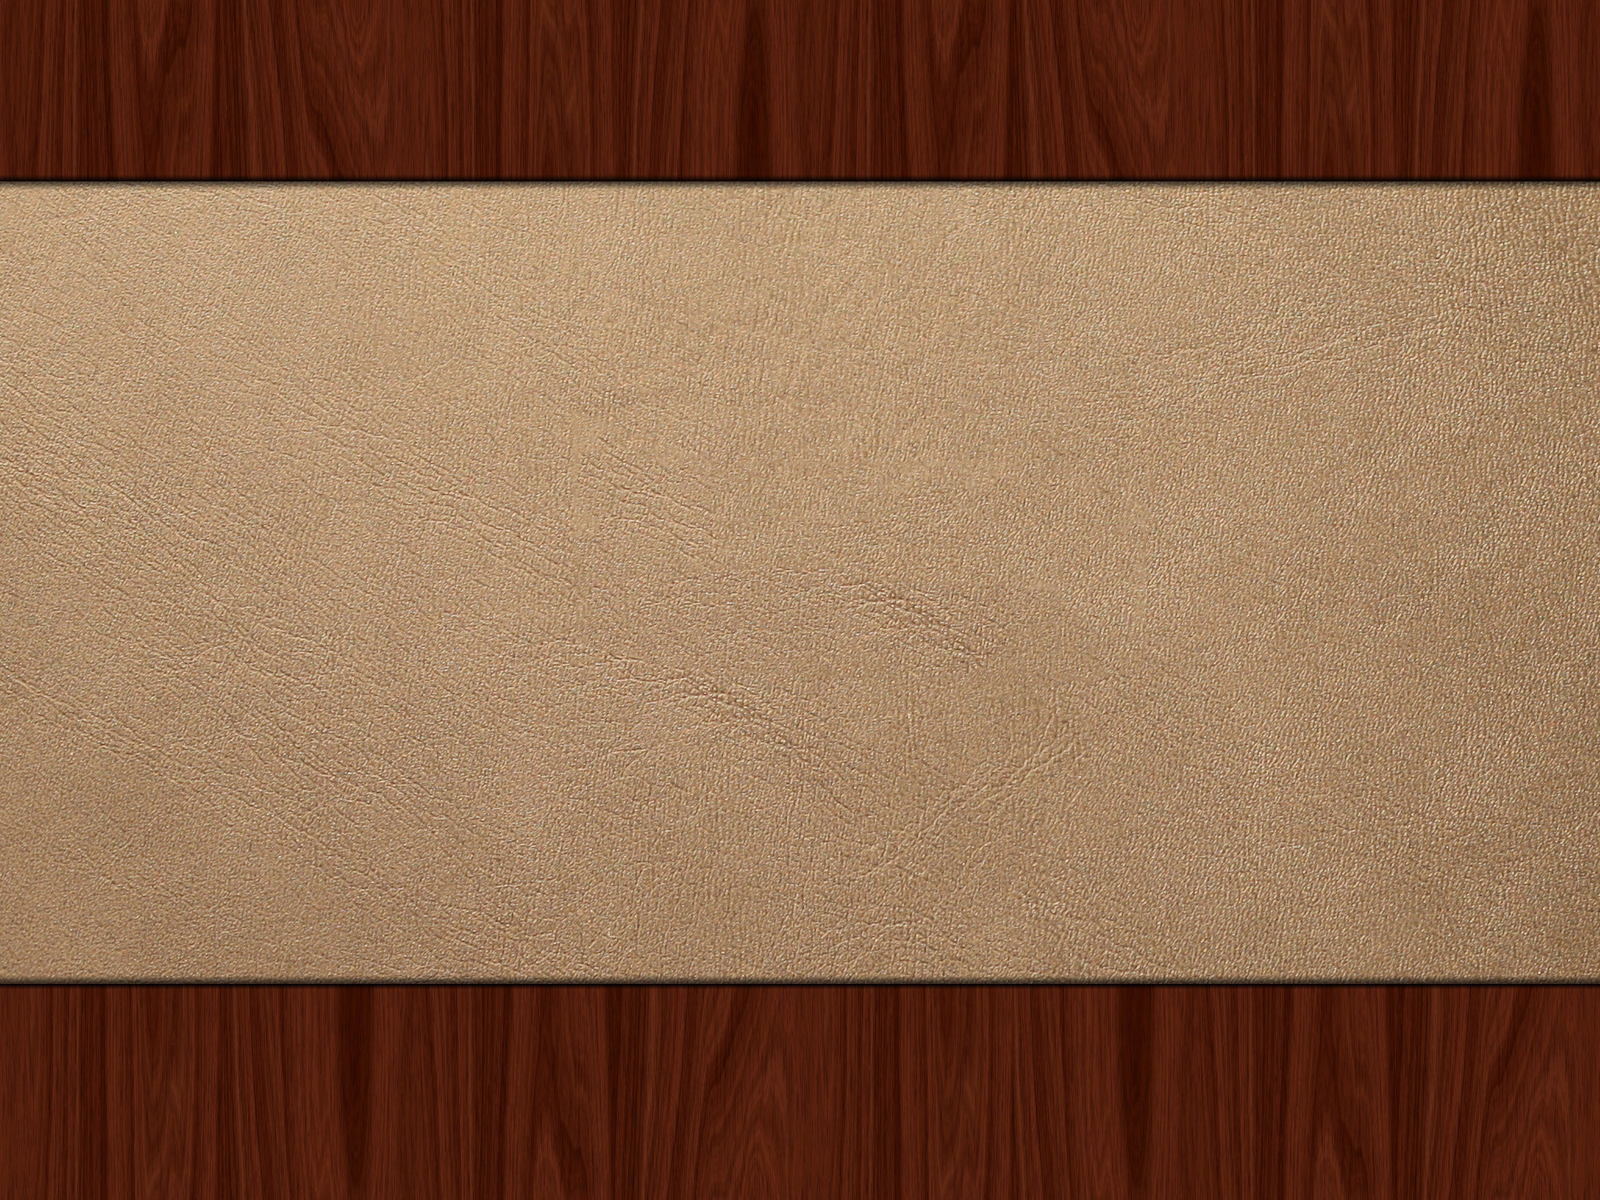 Brown Texture With Wood Band Background For PowerPoint, Google Slide